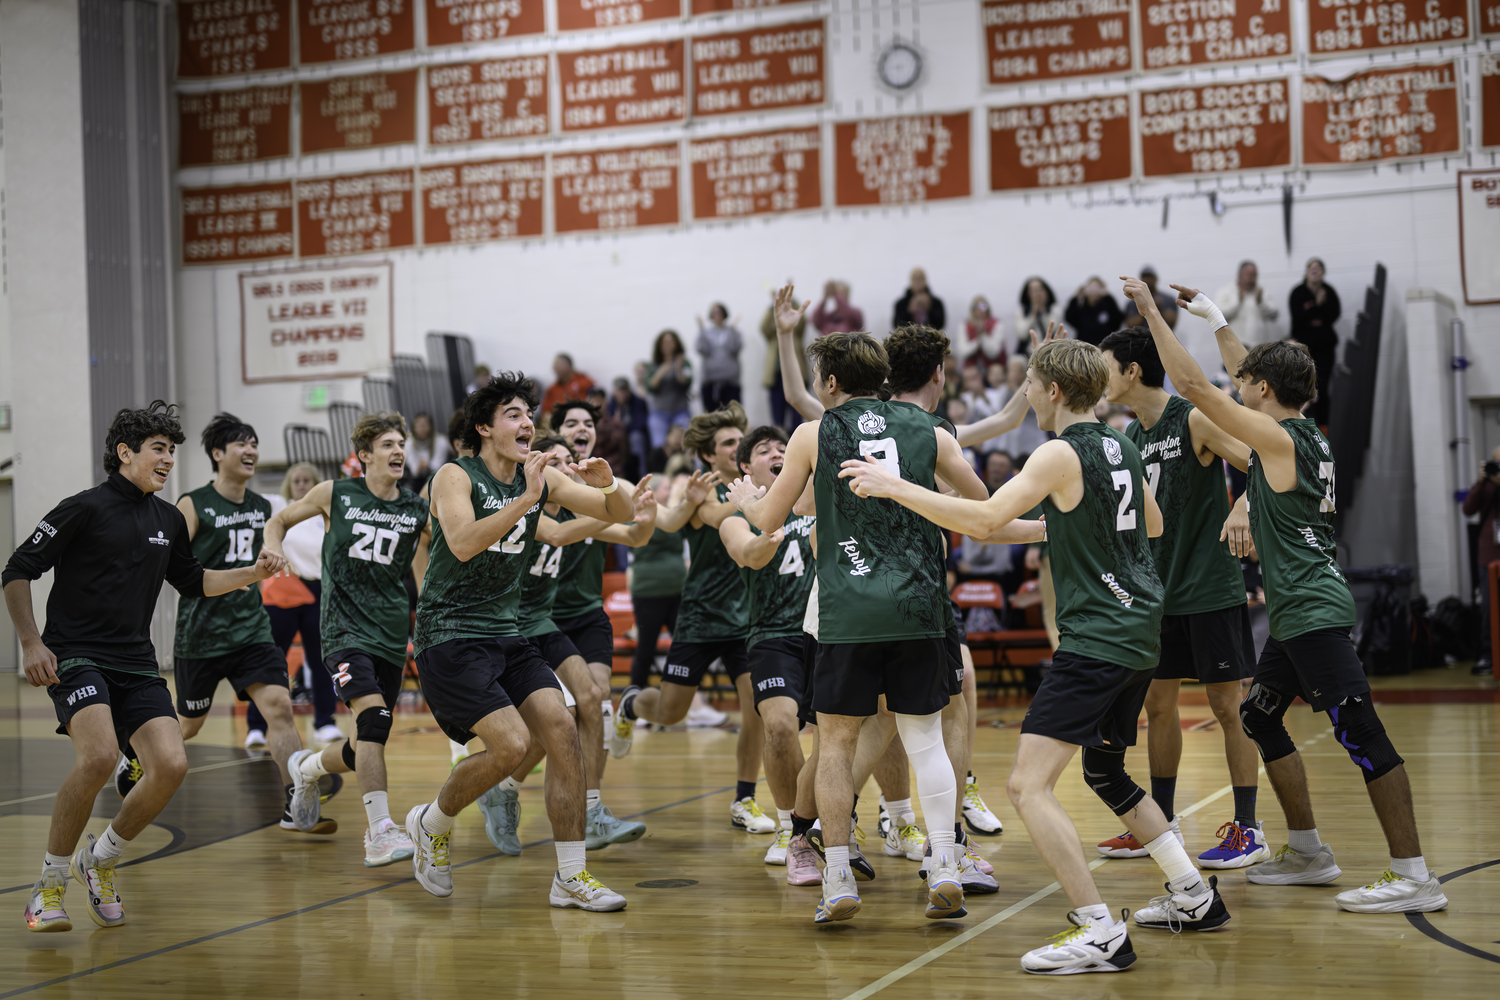 Westhampton Beach's boys volleyball team storms the court following the Hurricanes' second Division II Long Island Championship win. MARIANNE BARNETT